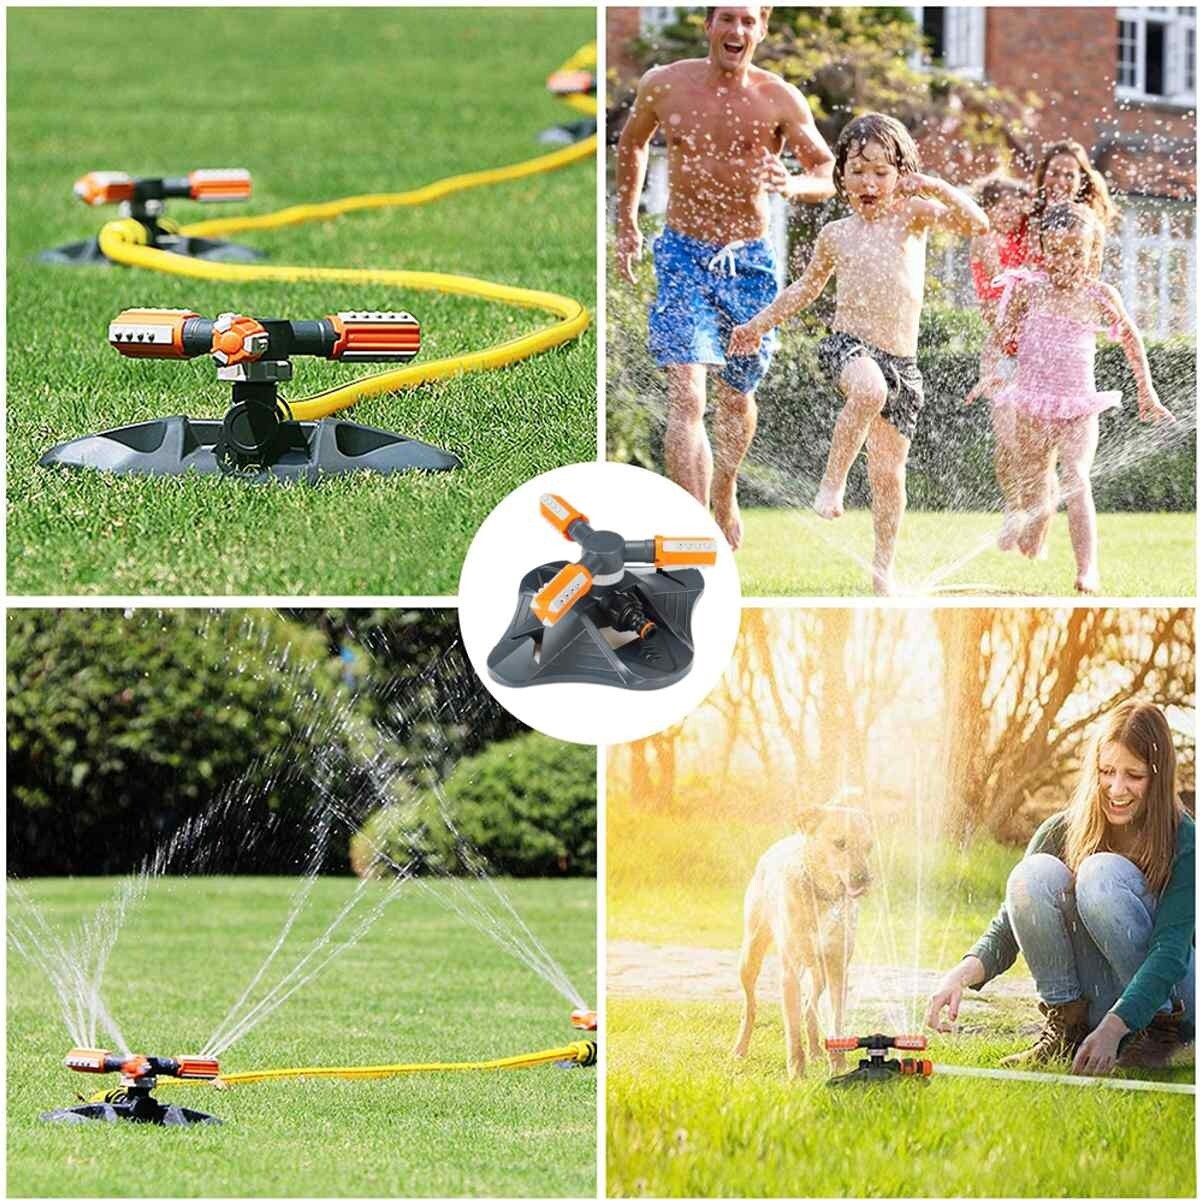 3 Armsx 360° Automatic Garden Sprinklers Watering Grass Lawn Rotary Nozzle Rotating Water Sprinkler System Garden Suppli Green - 2